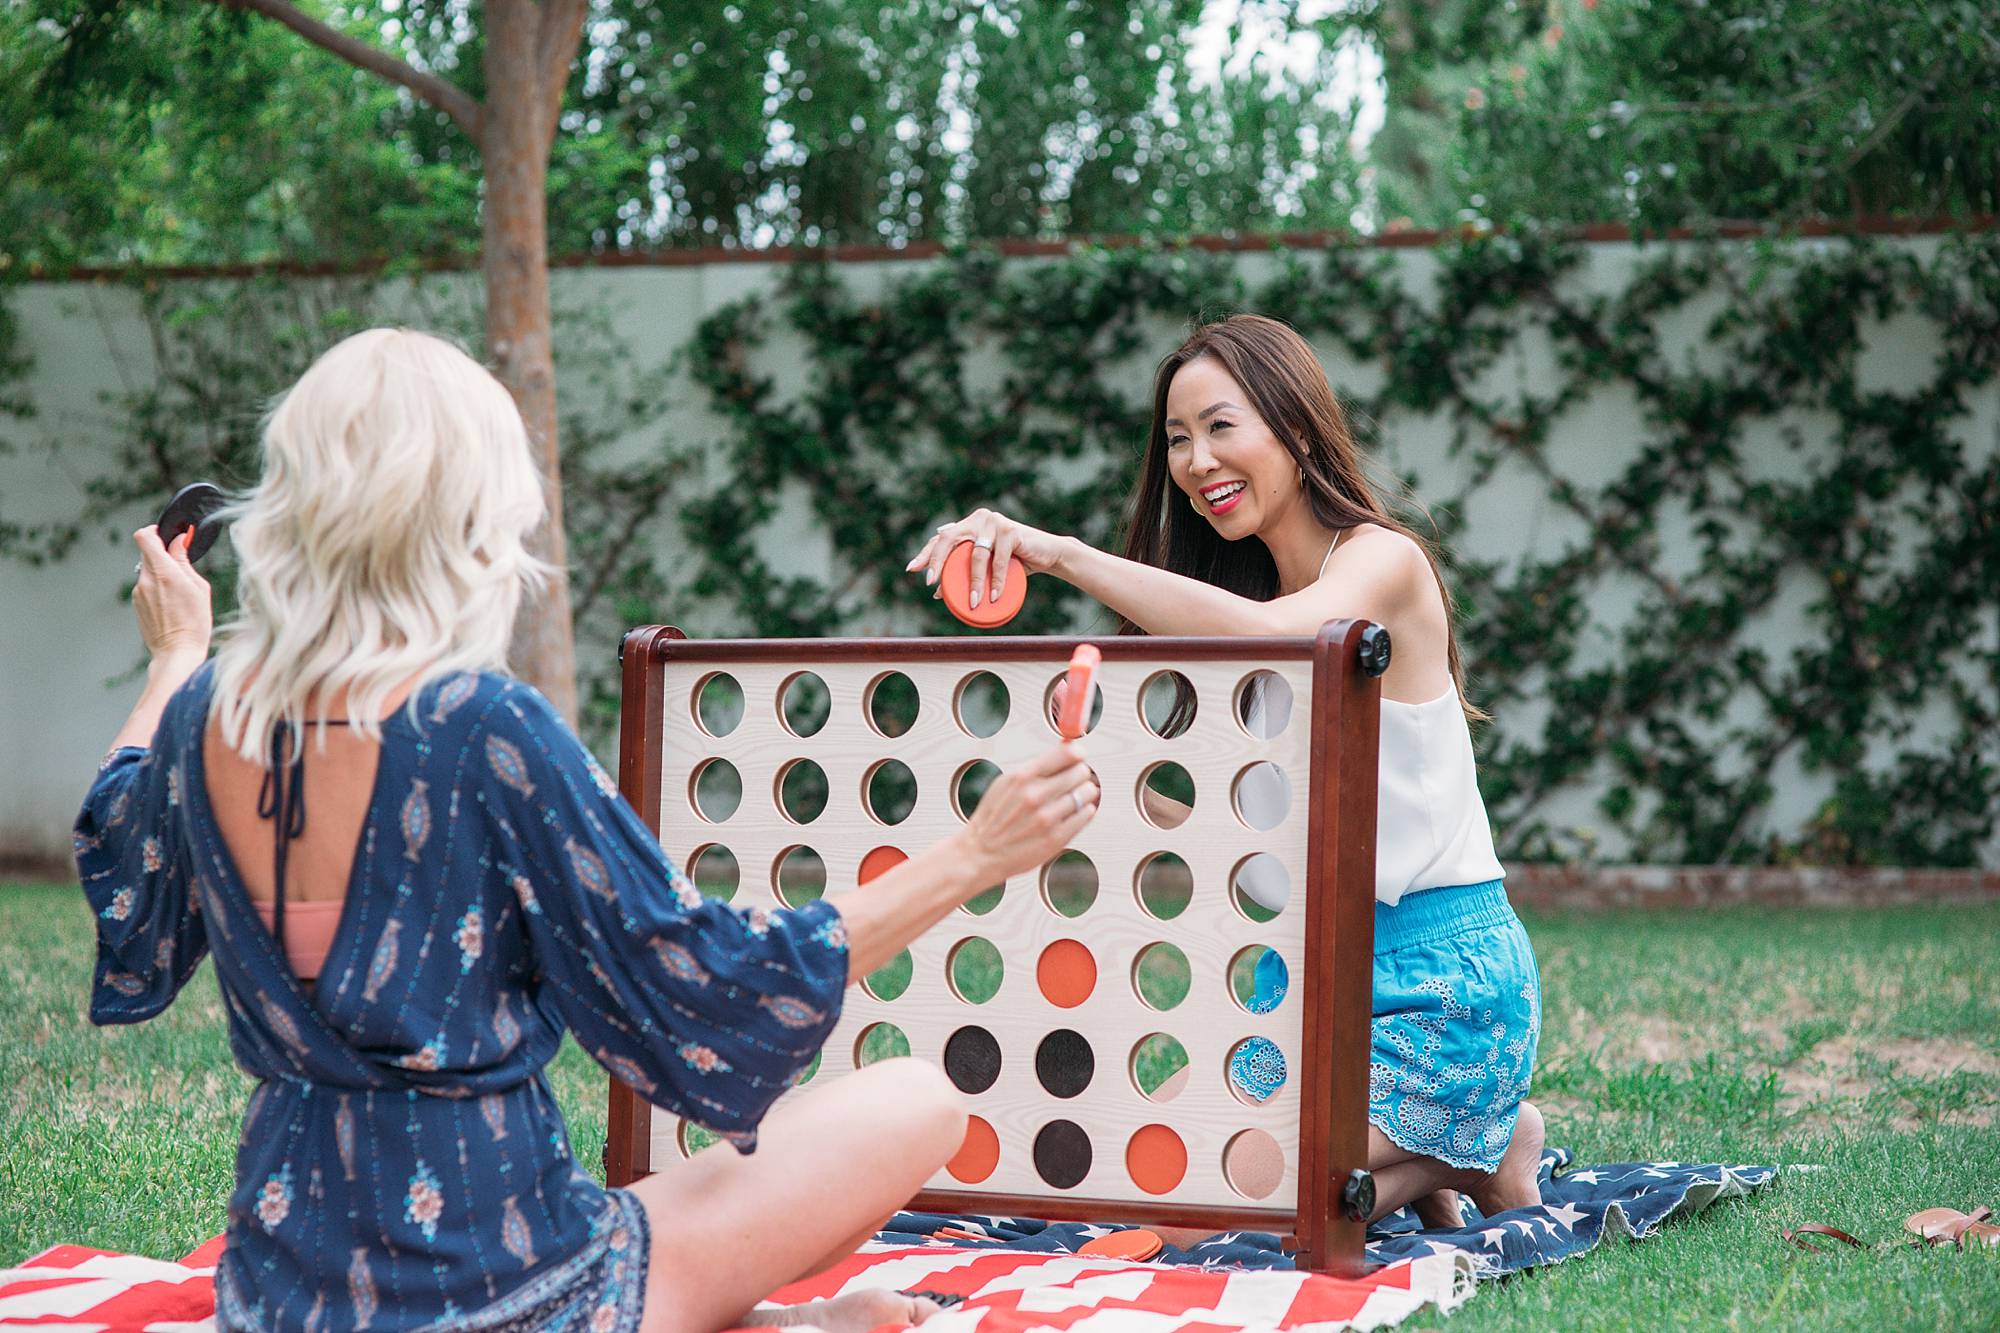  giant connect 4 in-a-row game for summer fun lawn game beach